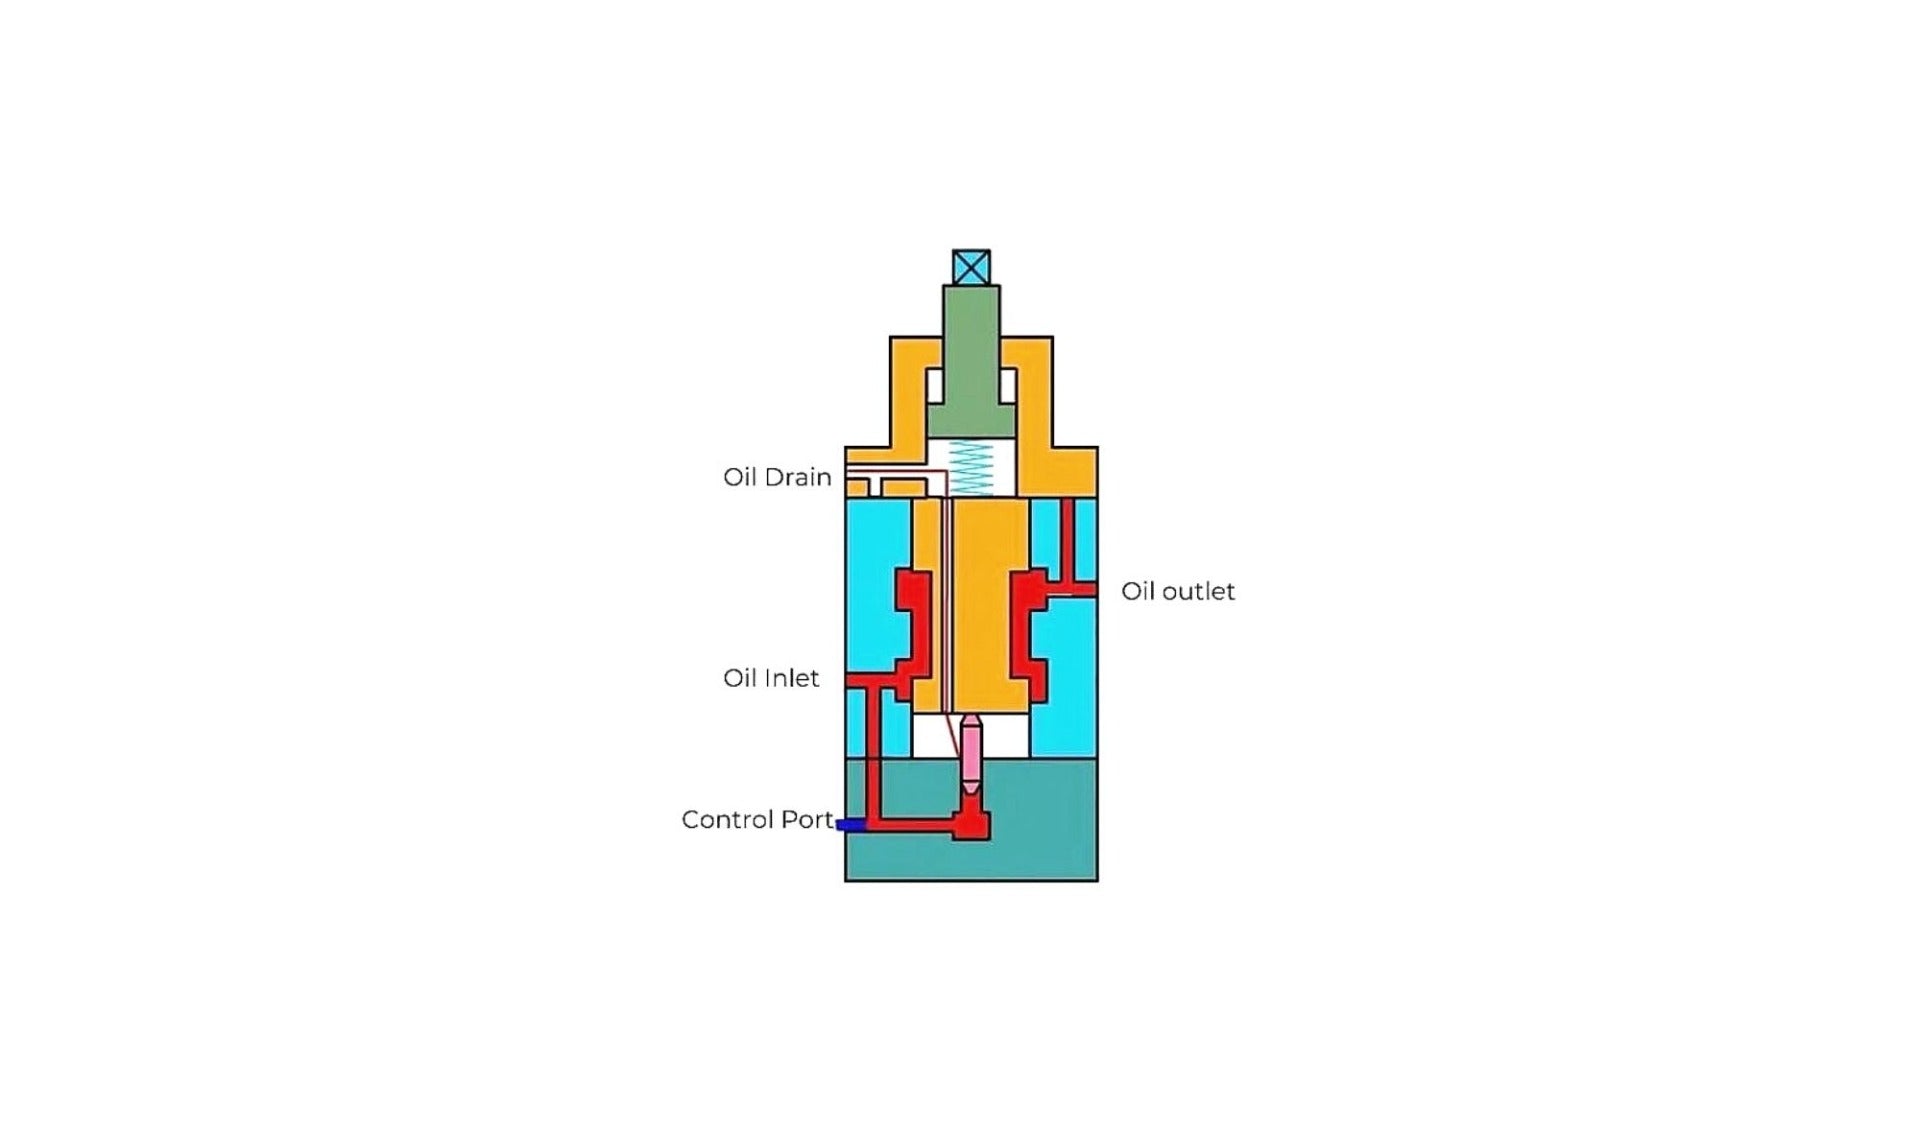 What are Sequence Valves